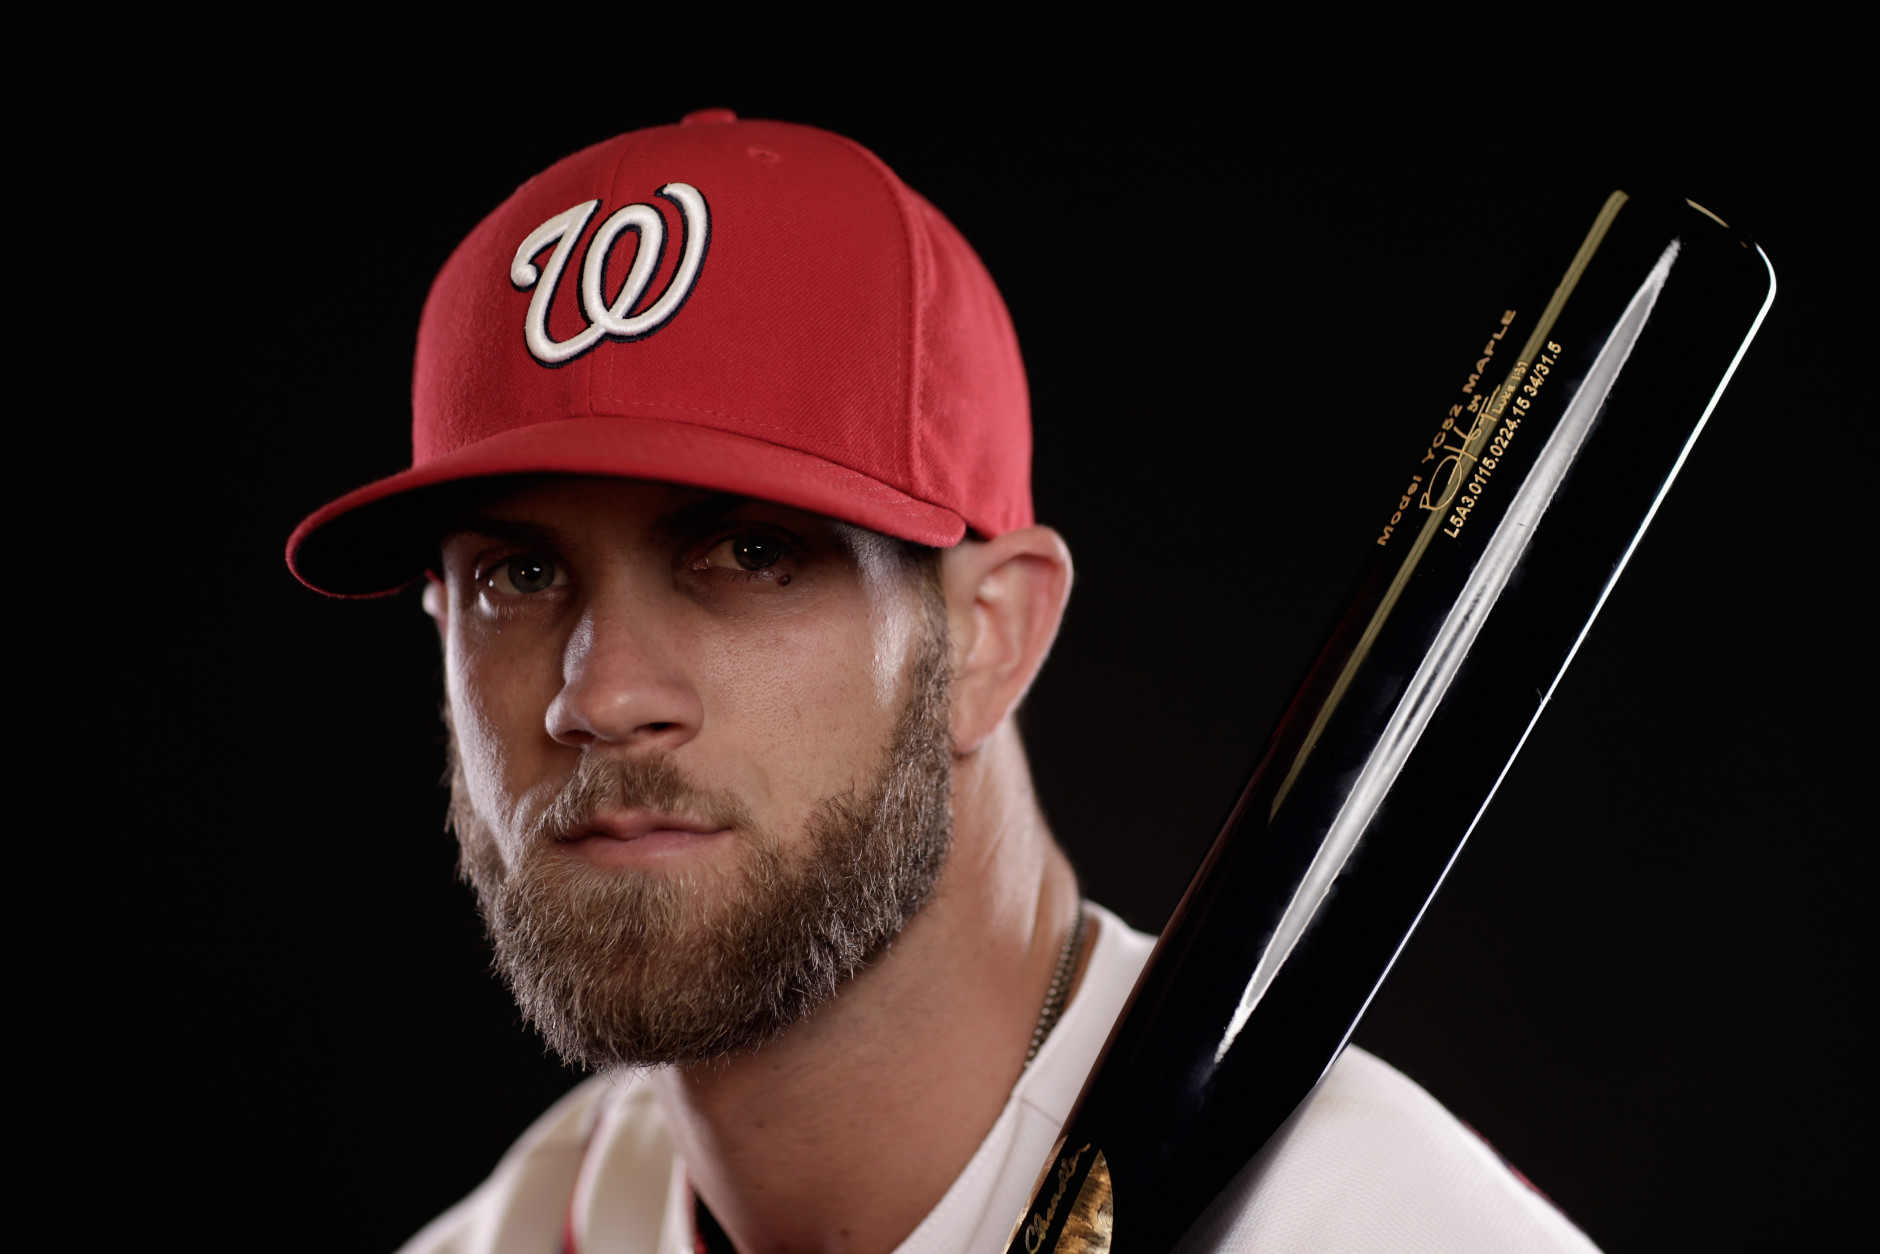 VIERA, FL - MARCH 01:  Bryce Harper #34 of the Washington Nationals poses for a portrait during photo day at Space Coast Stadium on March 1, 2015 in Viera, Florida.  (Photo by Chris Trotman/Getty Images)